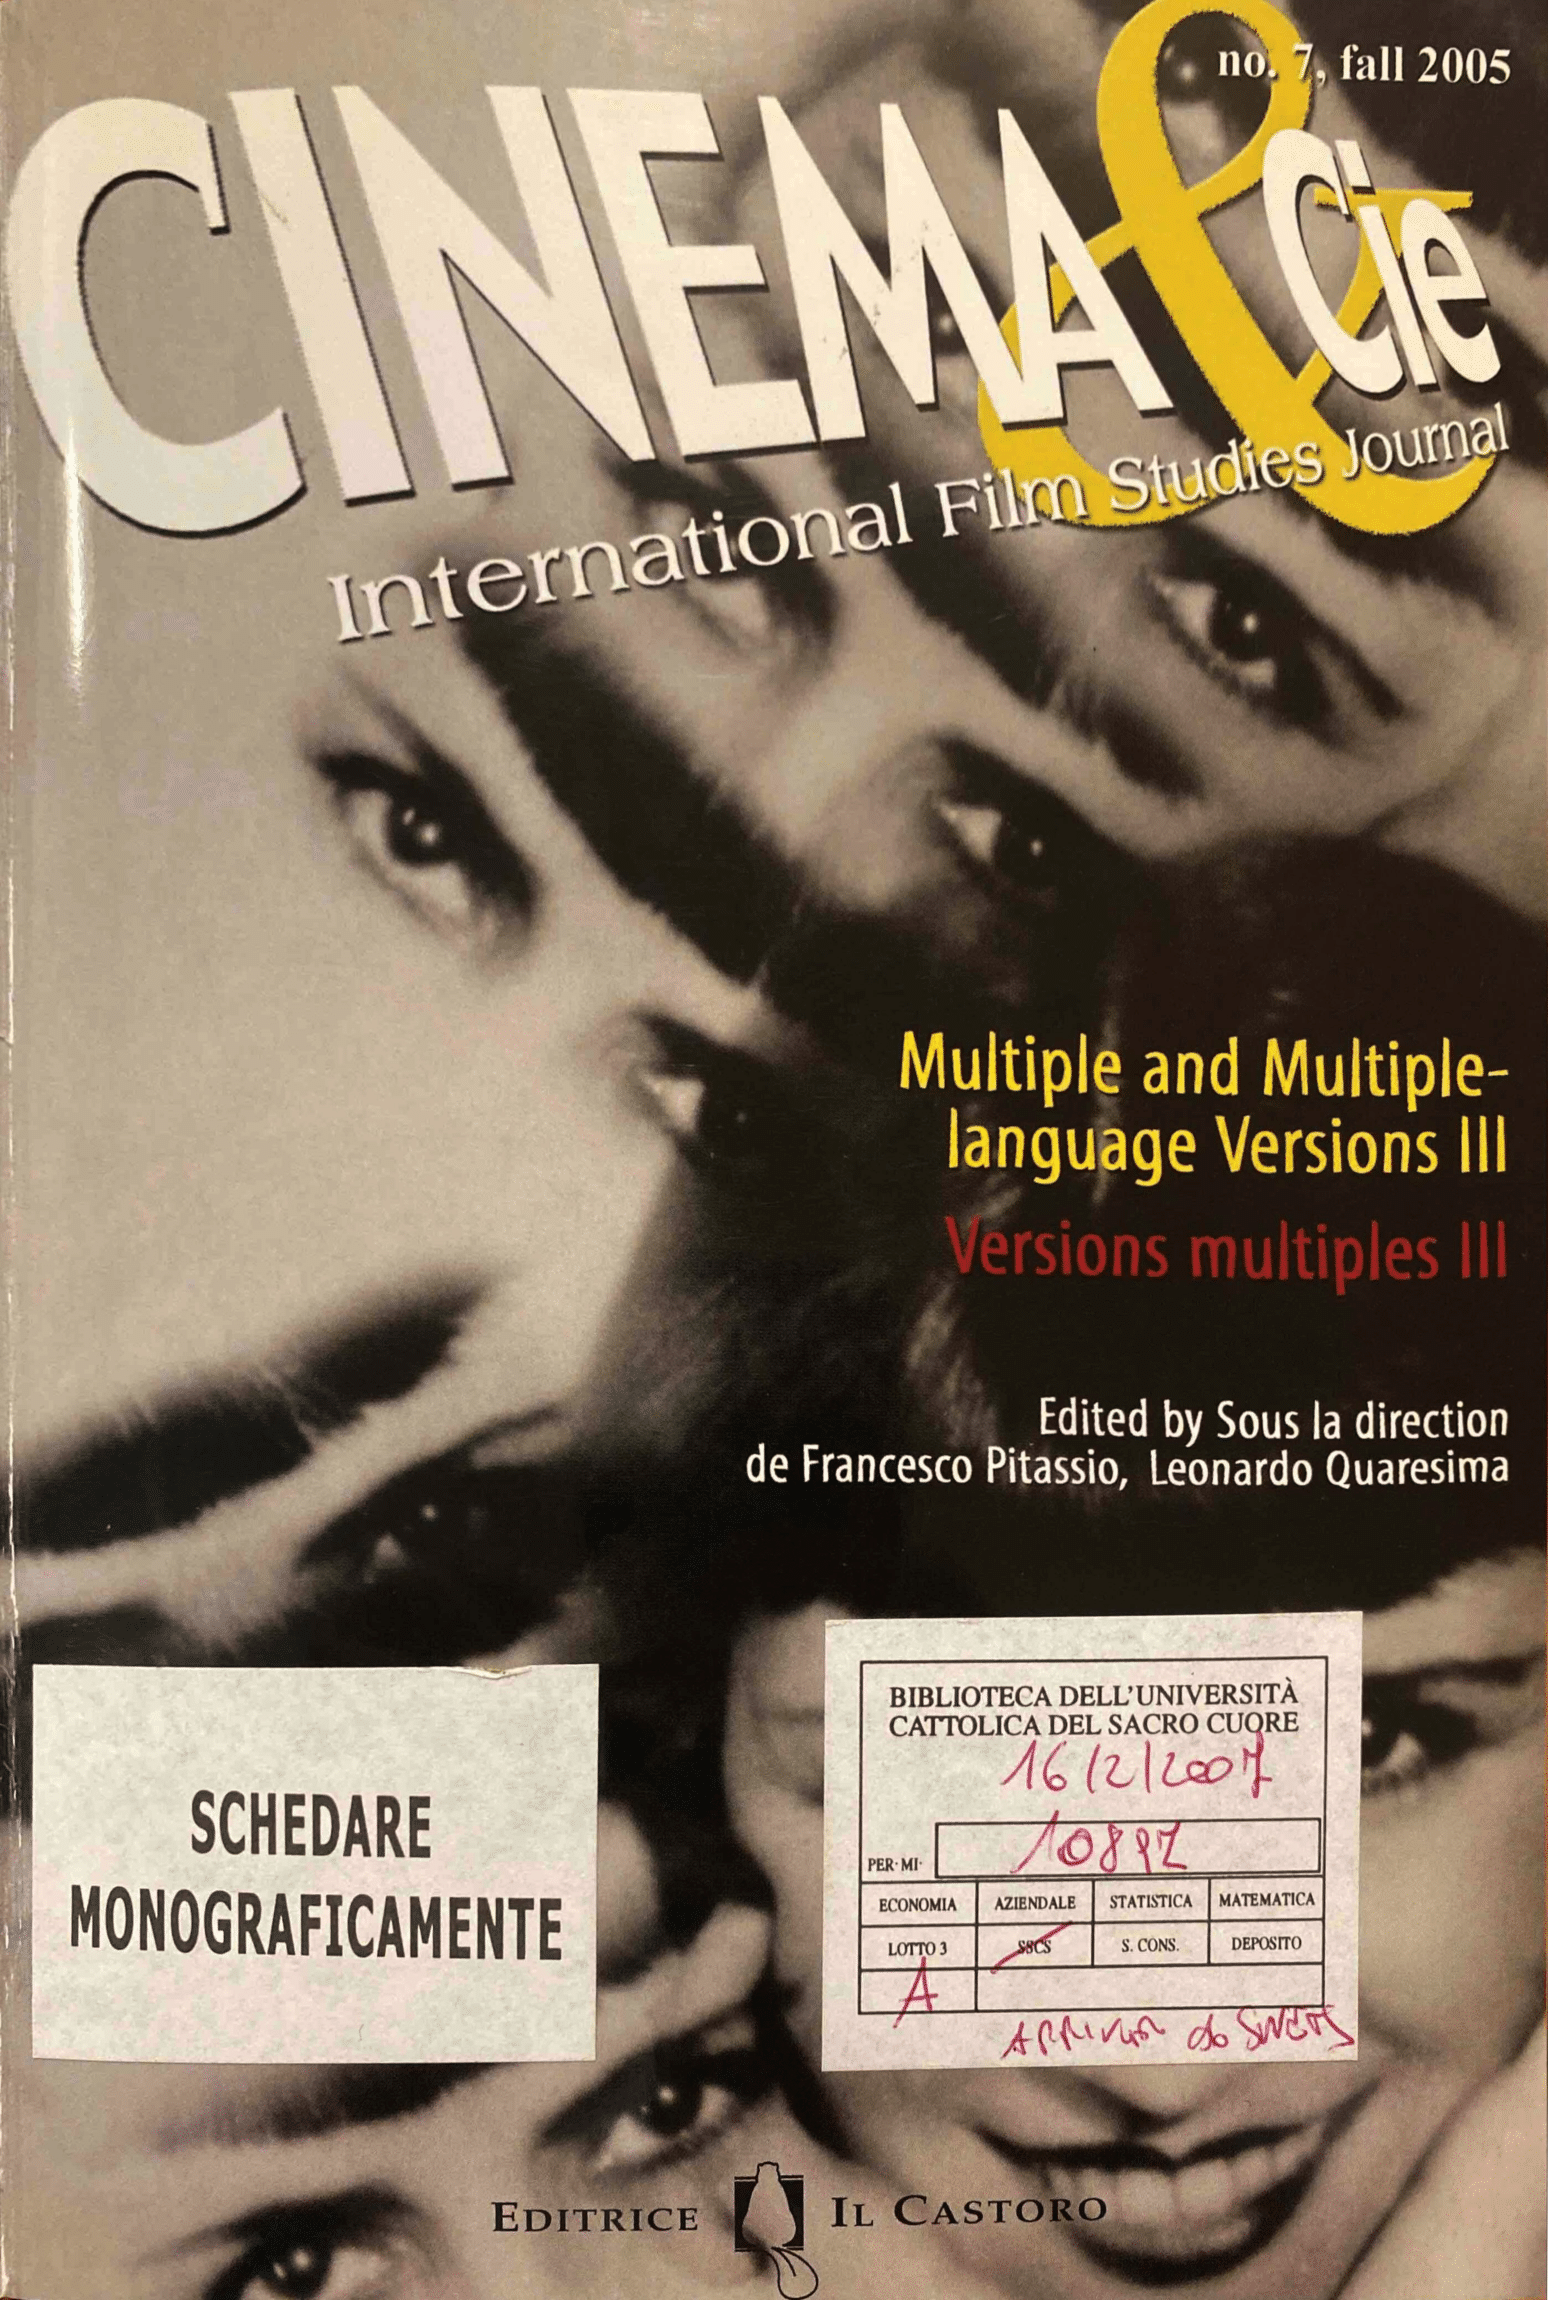 					View Vol. 5 No. 7 (2005): Multiple and Multiple-Language Versions III/Versions Multiples III
				